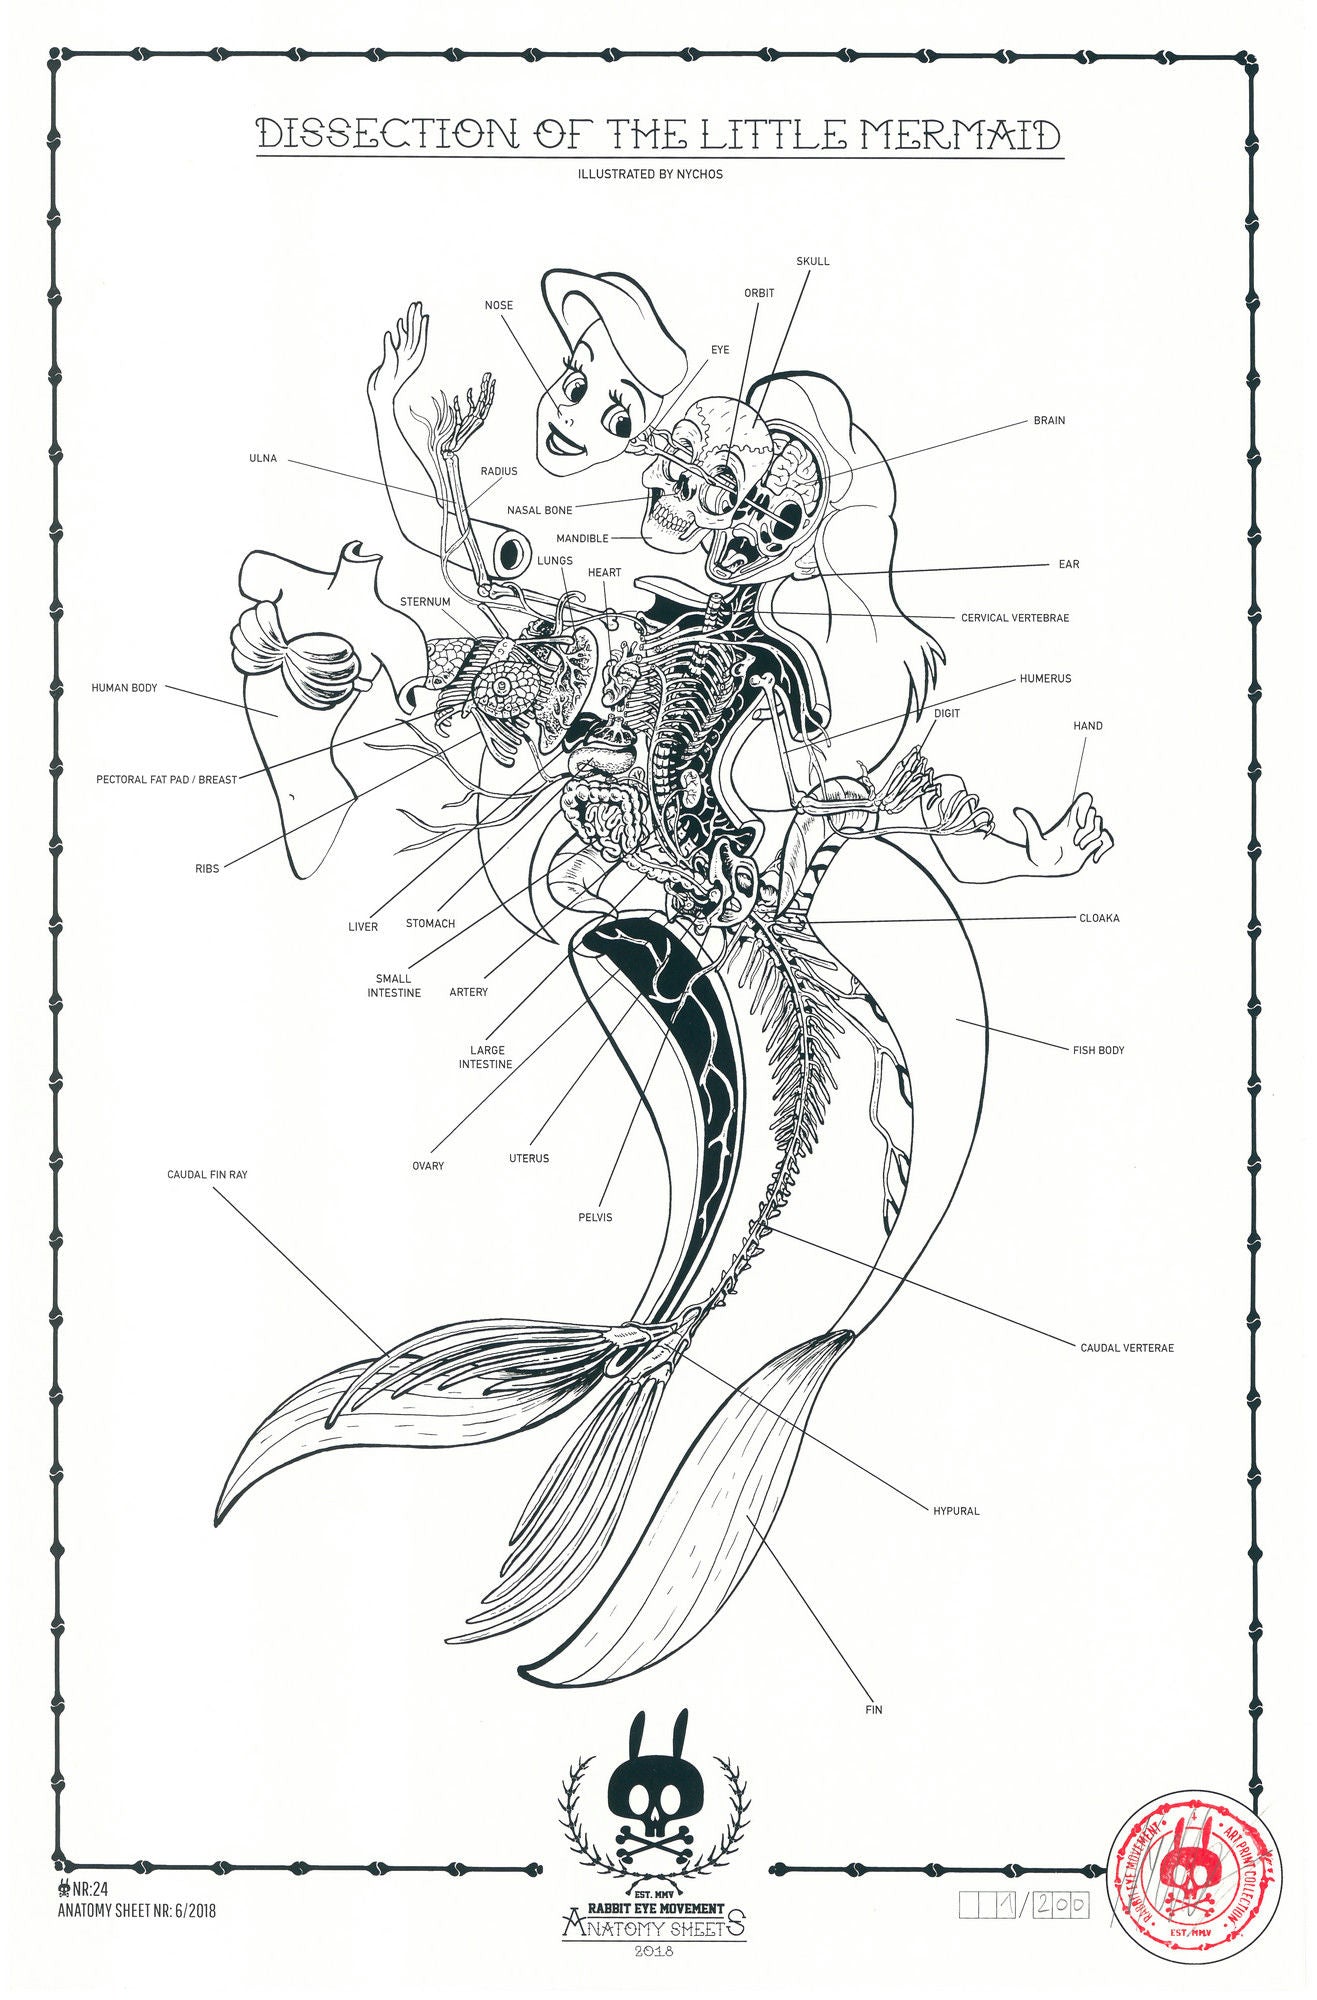 DISSECTION OF THE LITTLE MERMAID - ANATOMY SHEET NO. 24